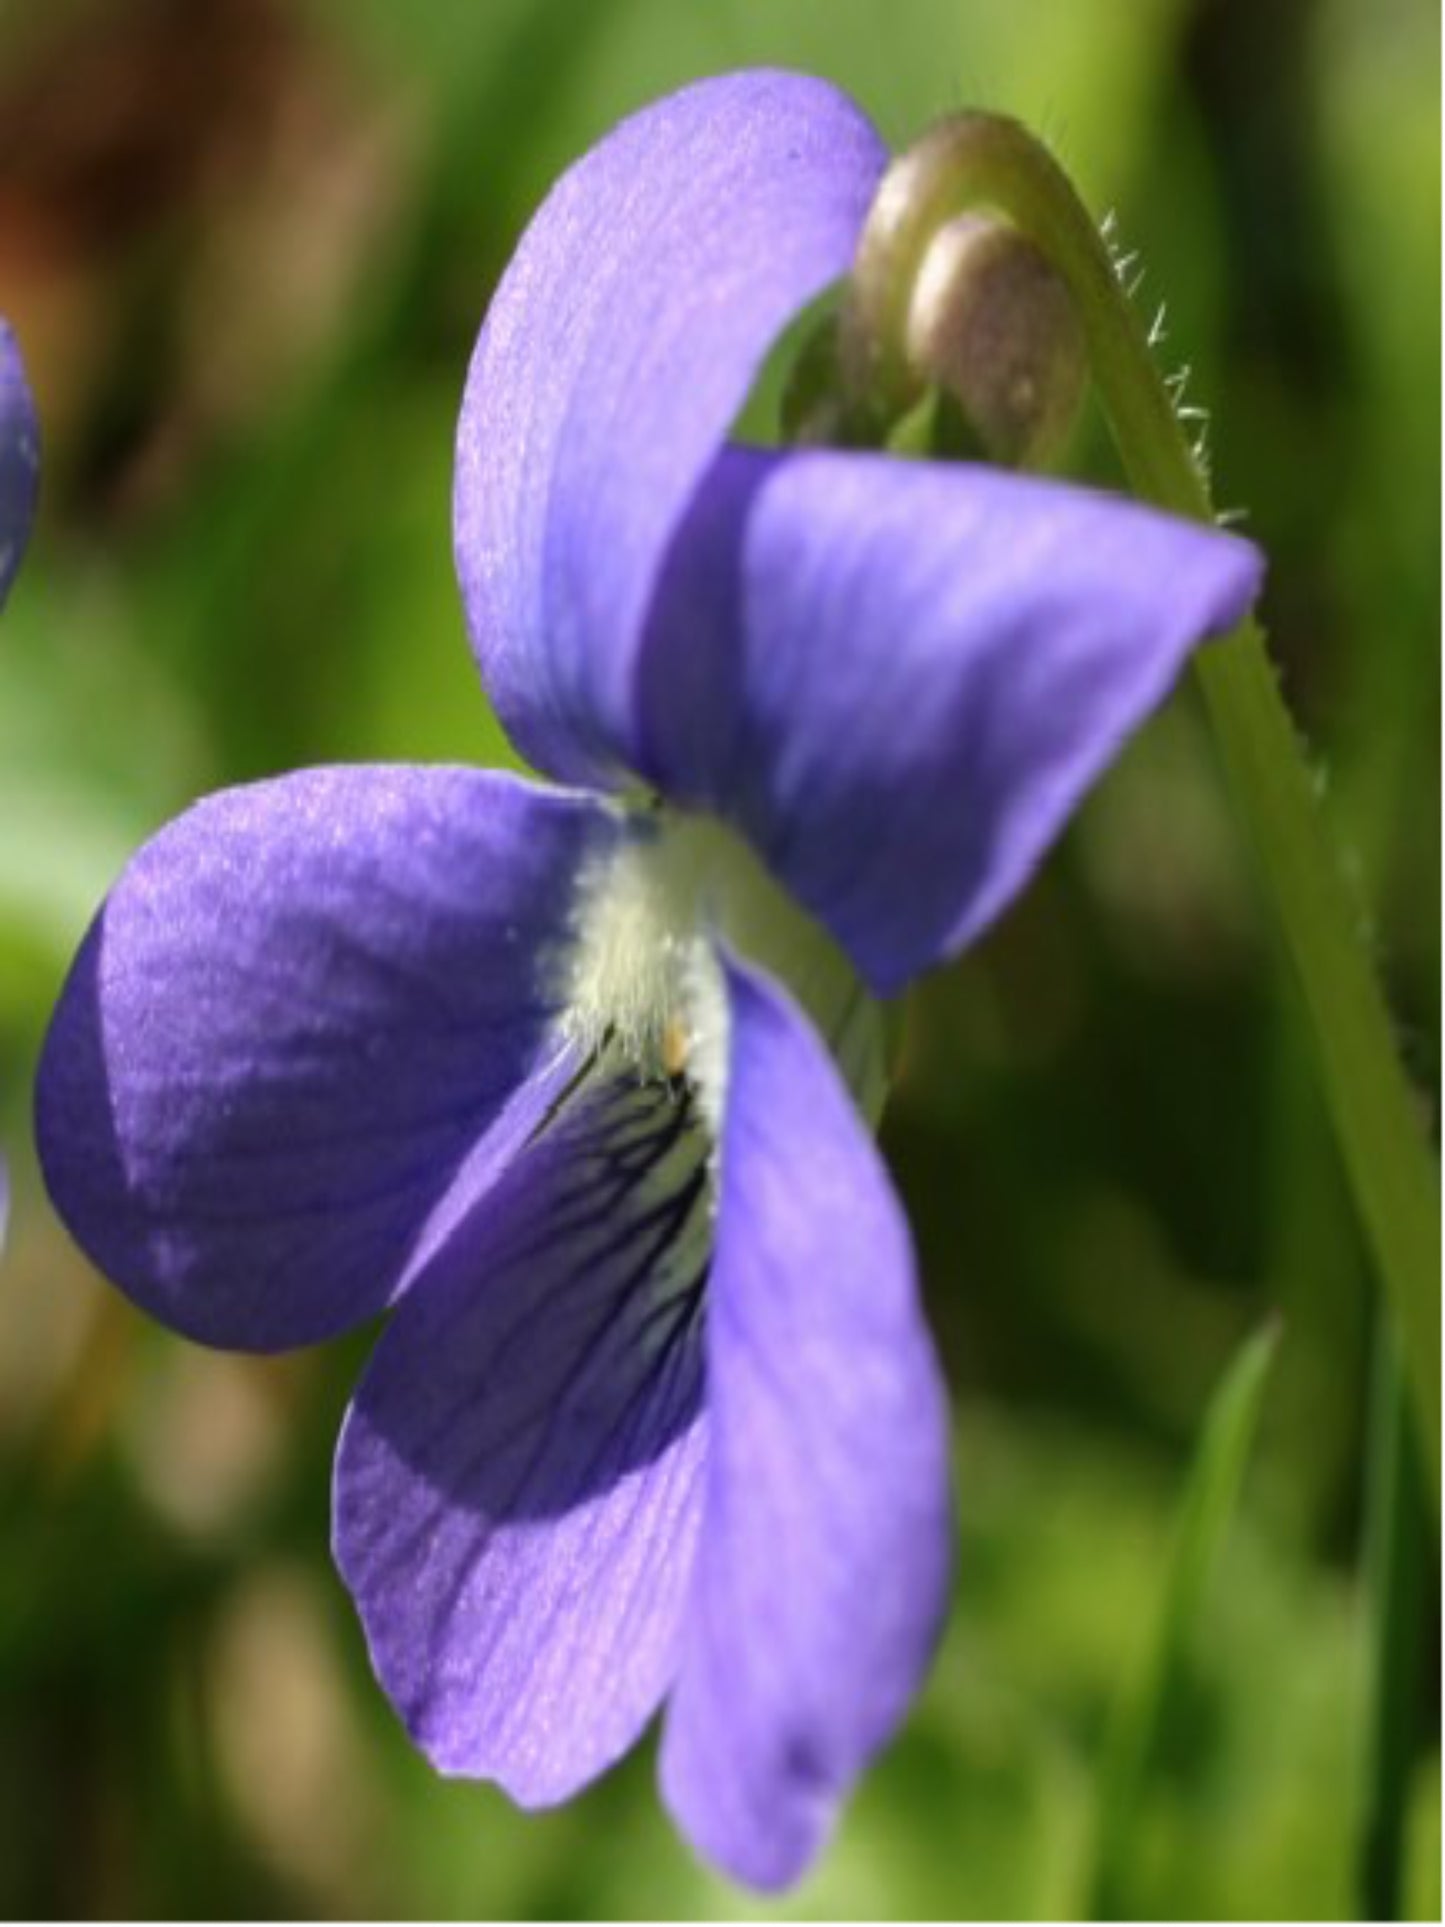 viola Walteri is the host plant for variegated fritillary butterfly